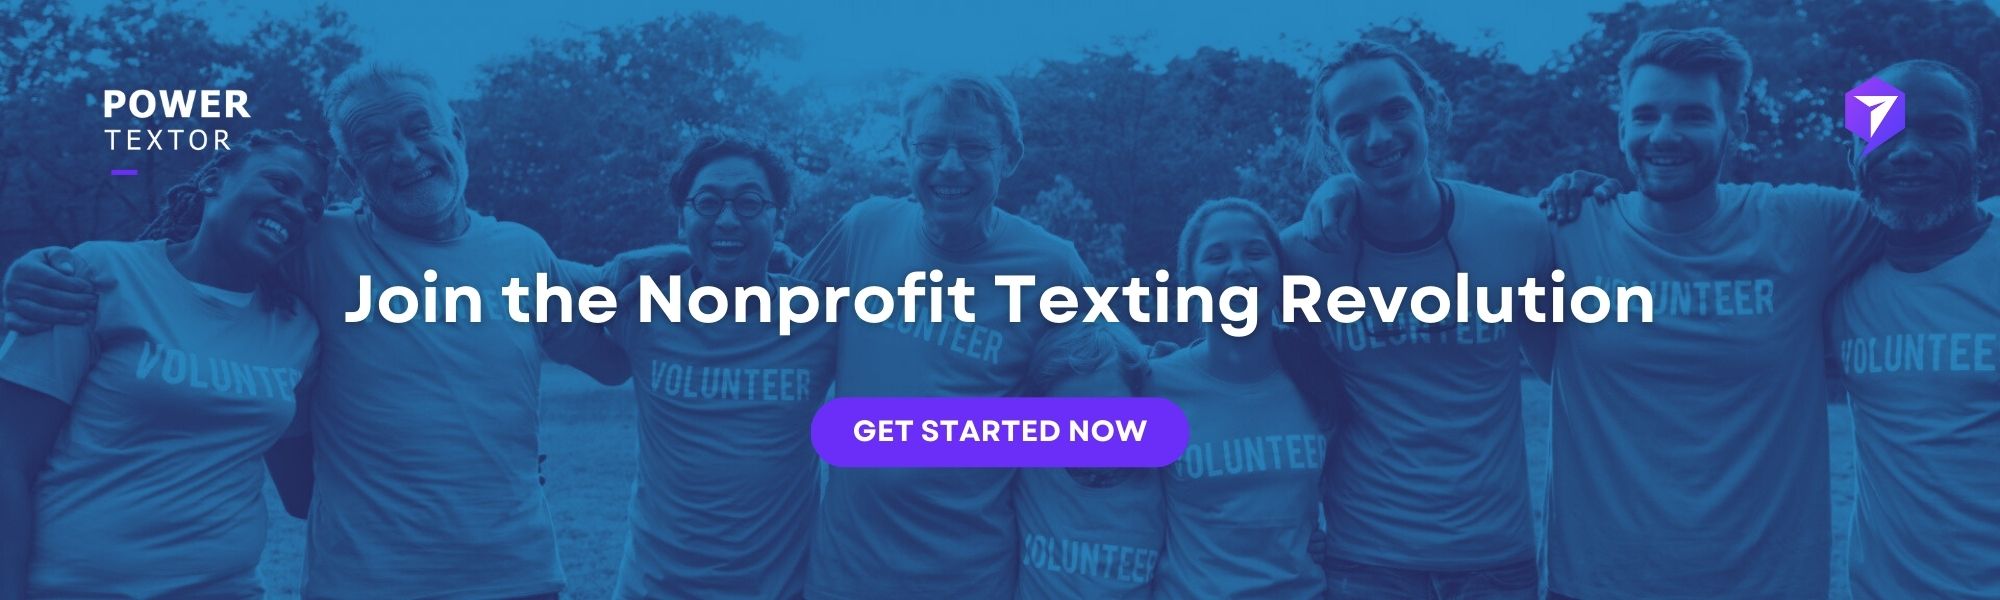 Texting services for nonprofits